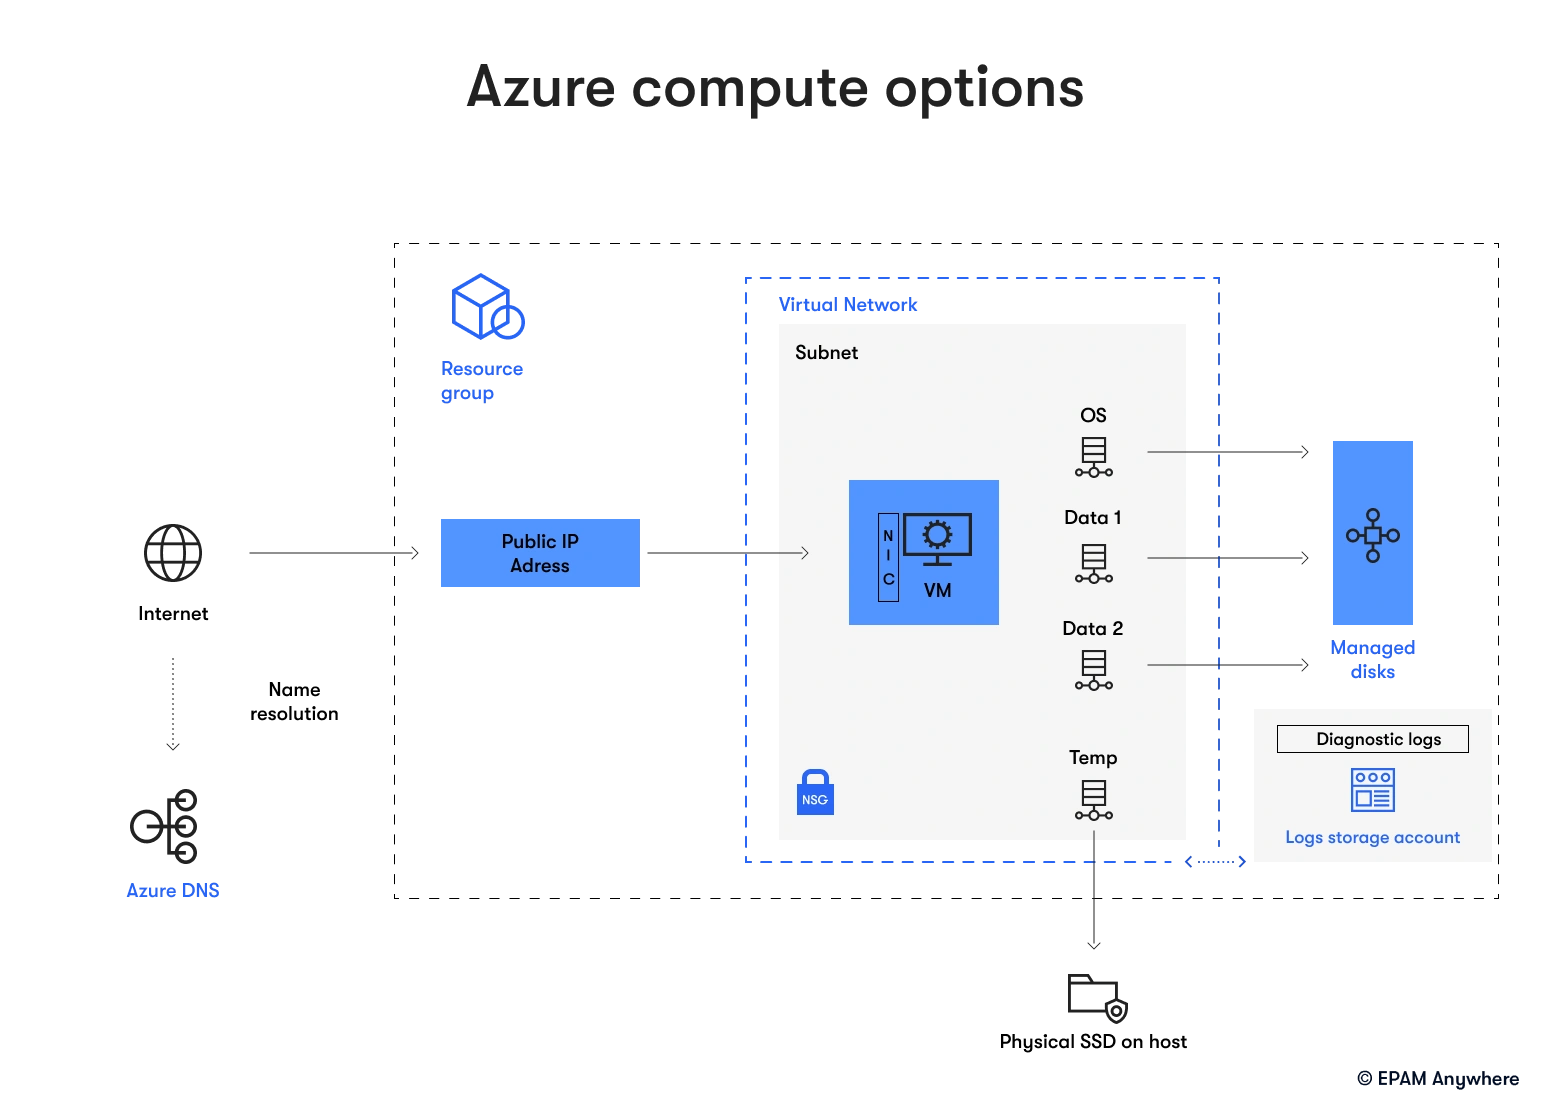 Azure compute options: Azure questions and answers